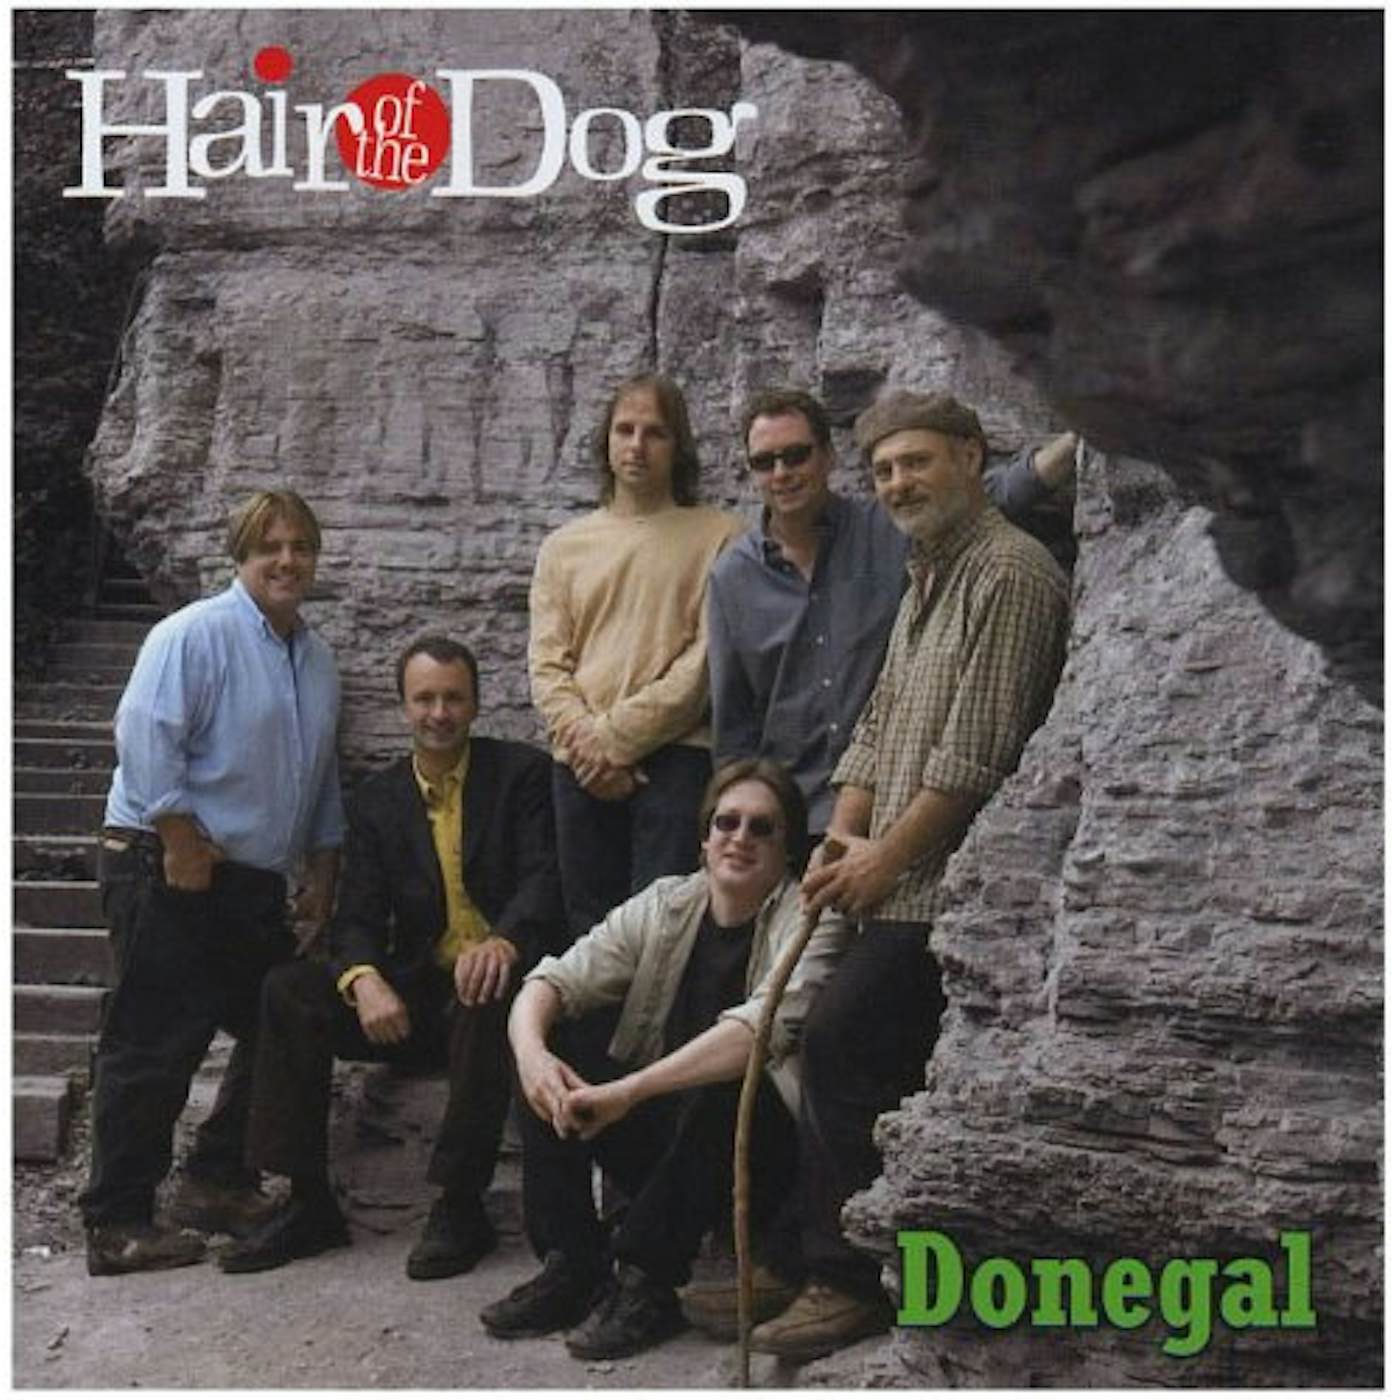 Hair of the Dog DONEGAL CD